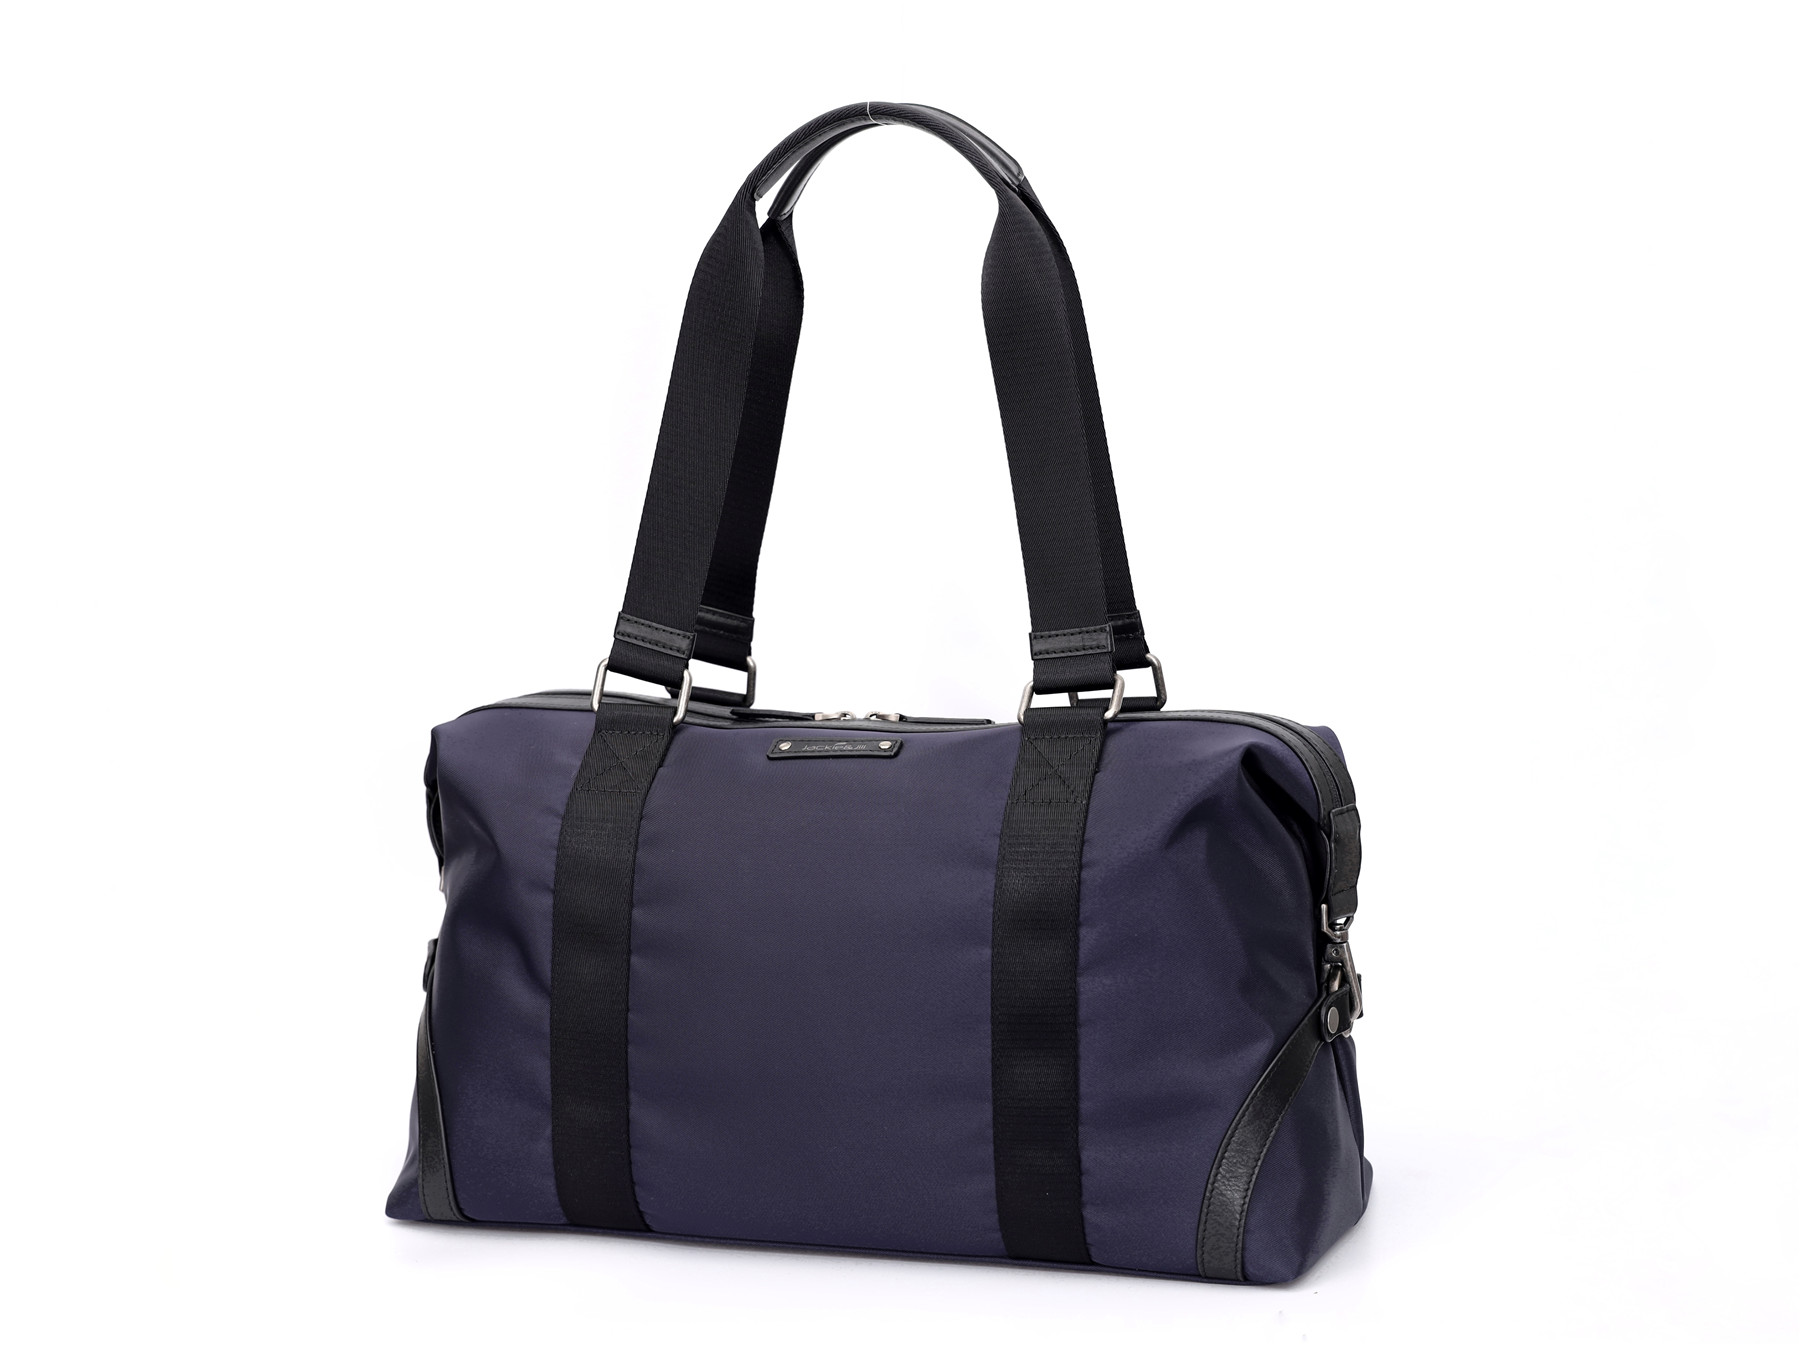 Professional Tote Handbags & High Quality Briefcase On GF Bags